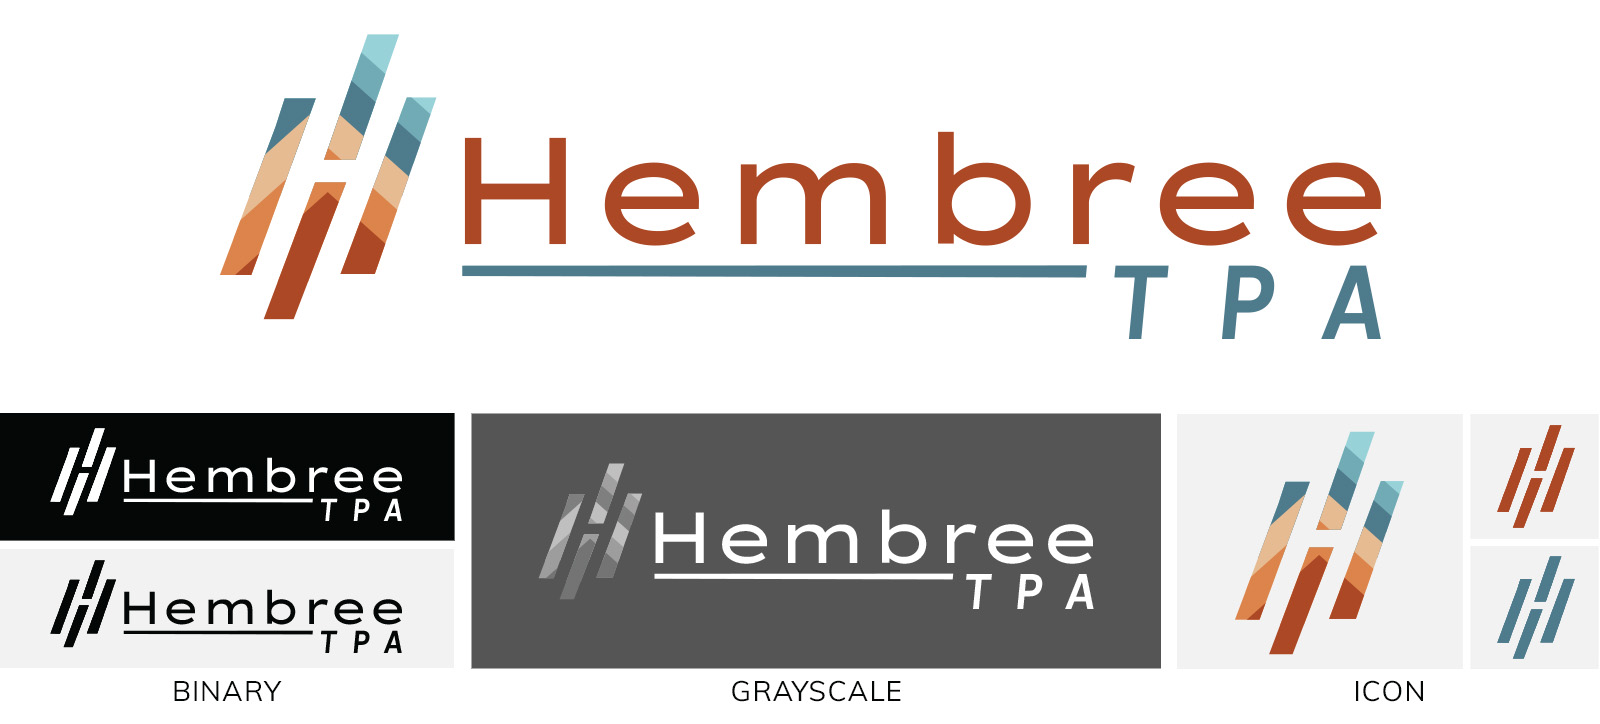 Hembree logo set displaying the primary logo, a binary alternate color, a grayscale color version, and the Hembree icon